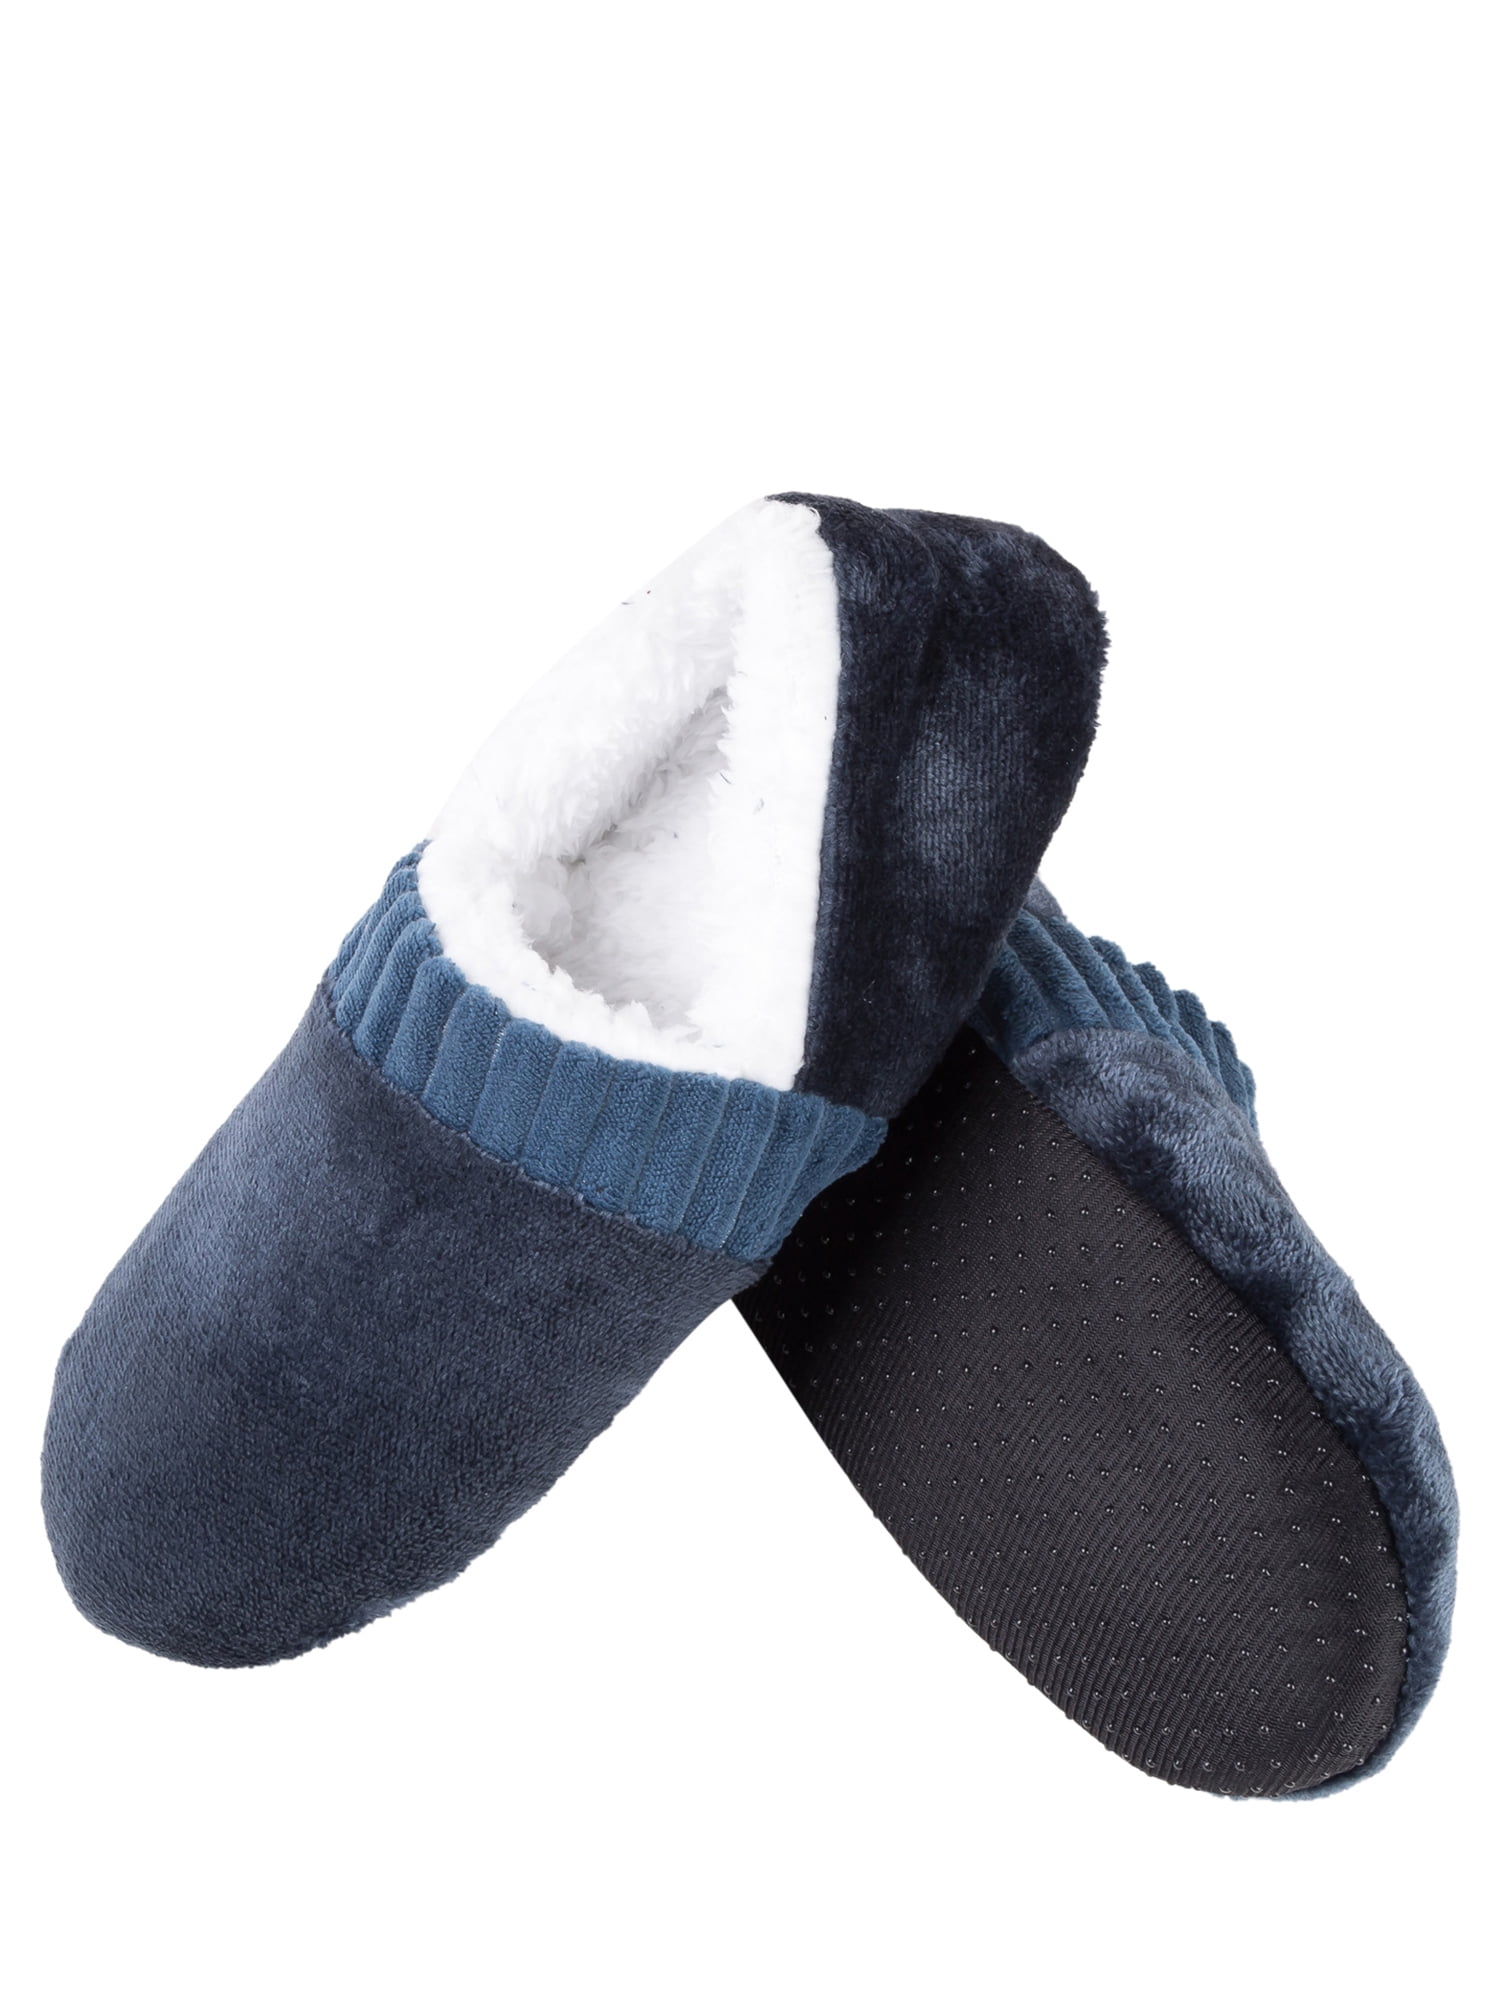 Zodanni Mens Slipper Socks With Grippers Soft Sole- Fuzzy Sherpa Lining ...